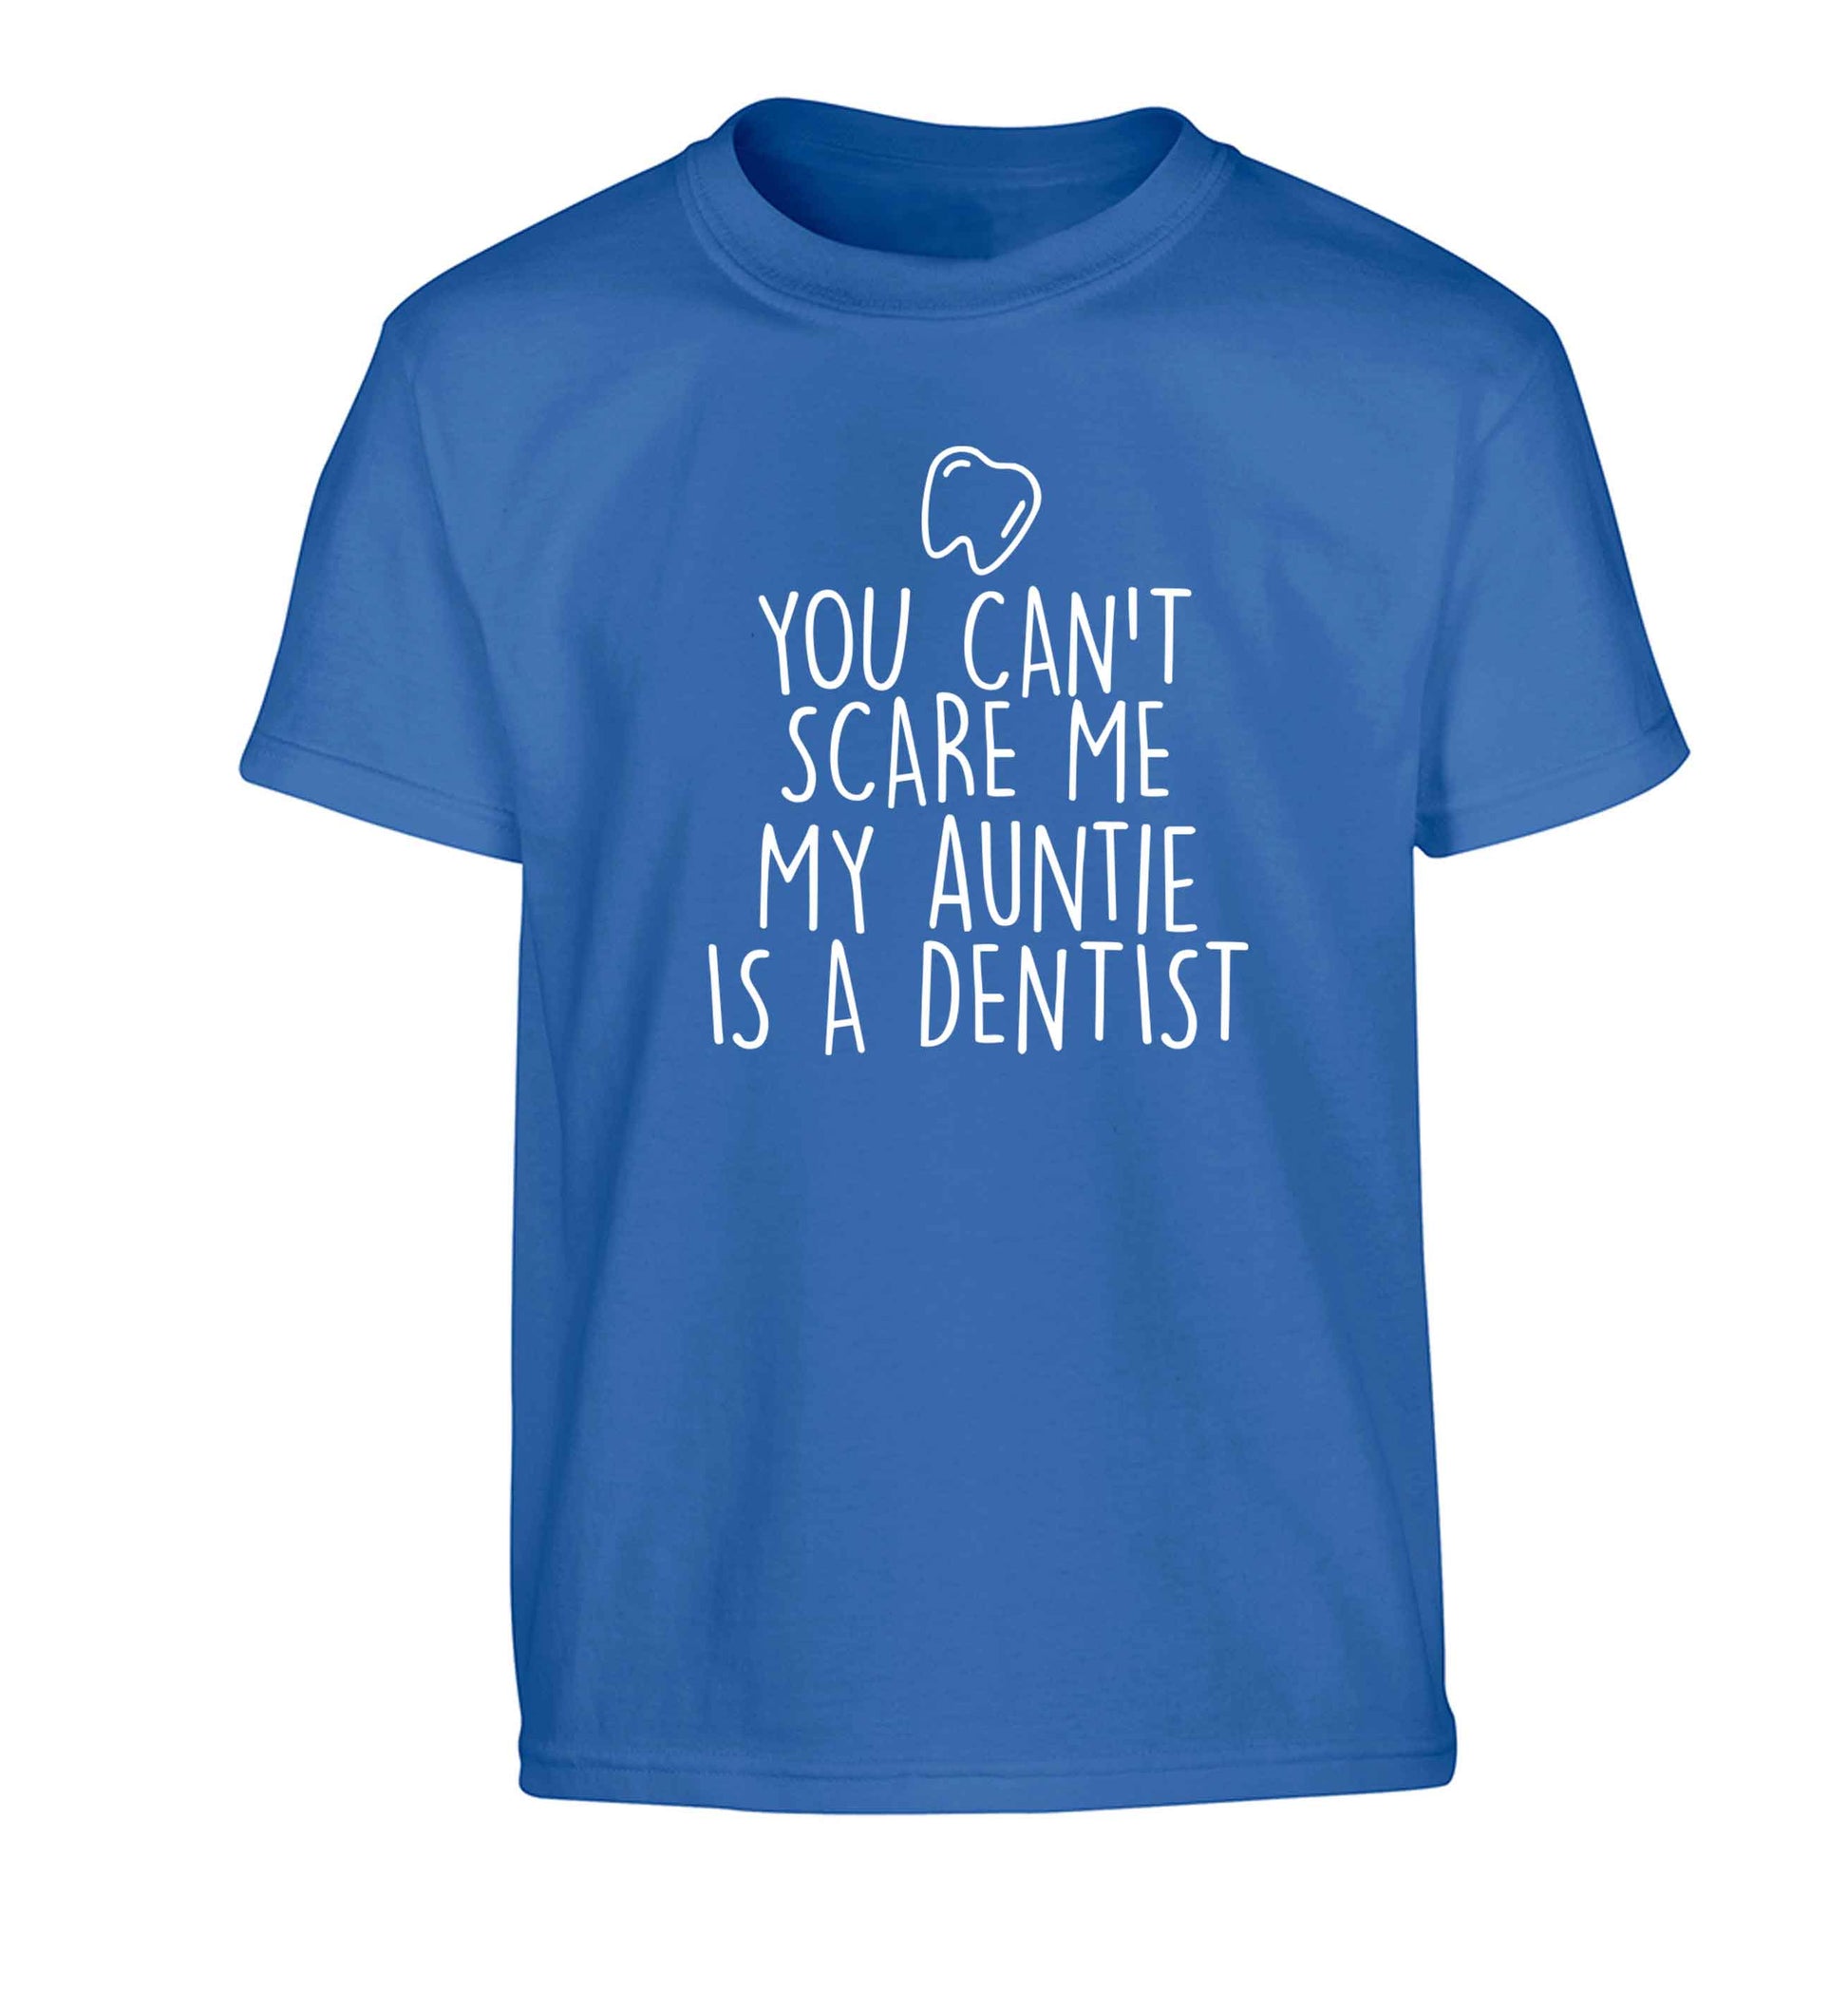 You can't scare me my auntie is a dentist Children's blue Tshirt 12-13 Years